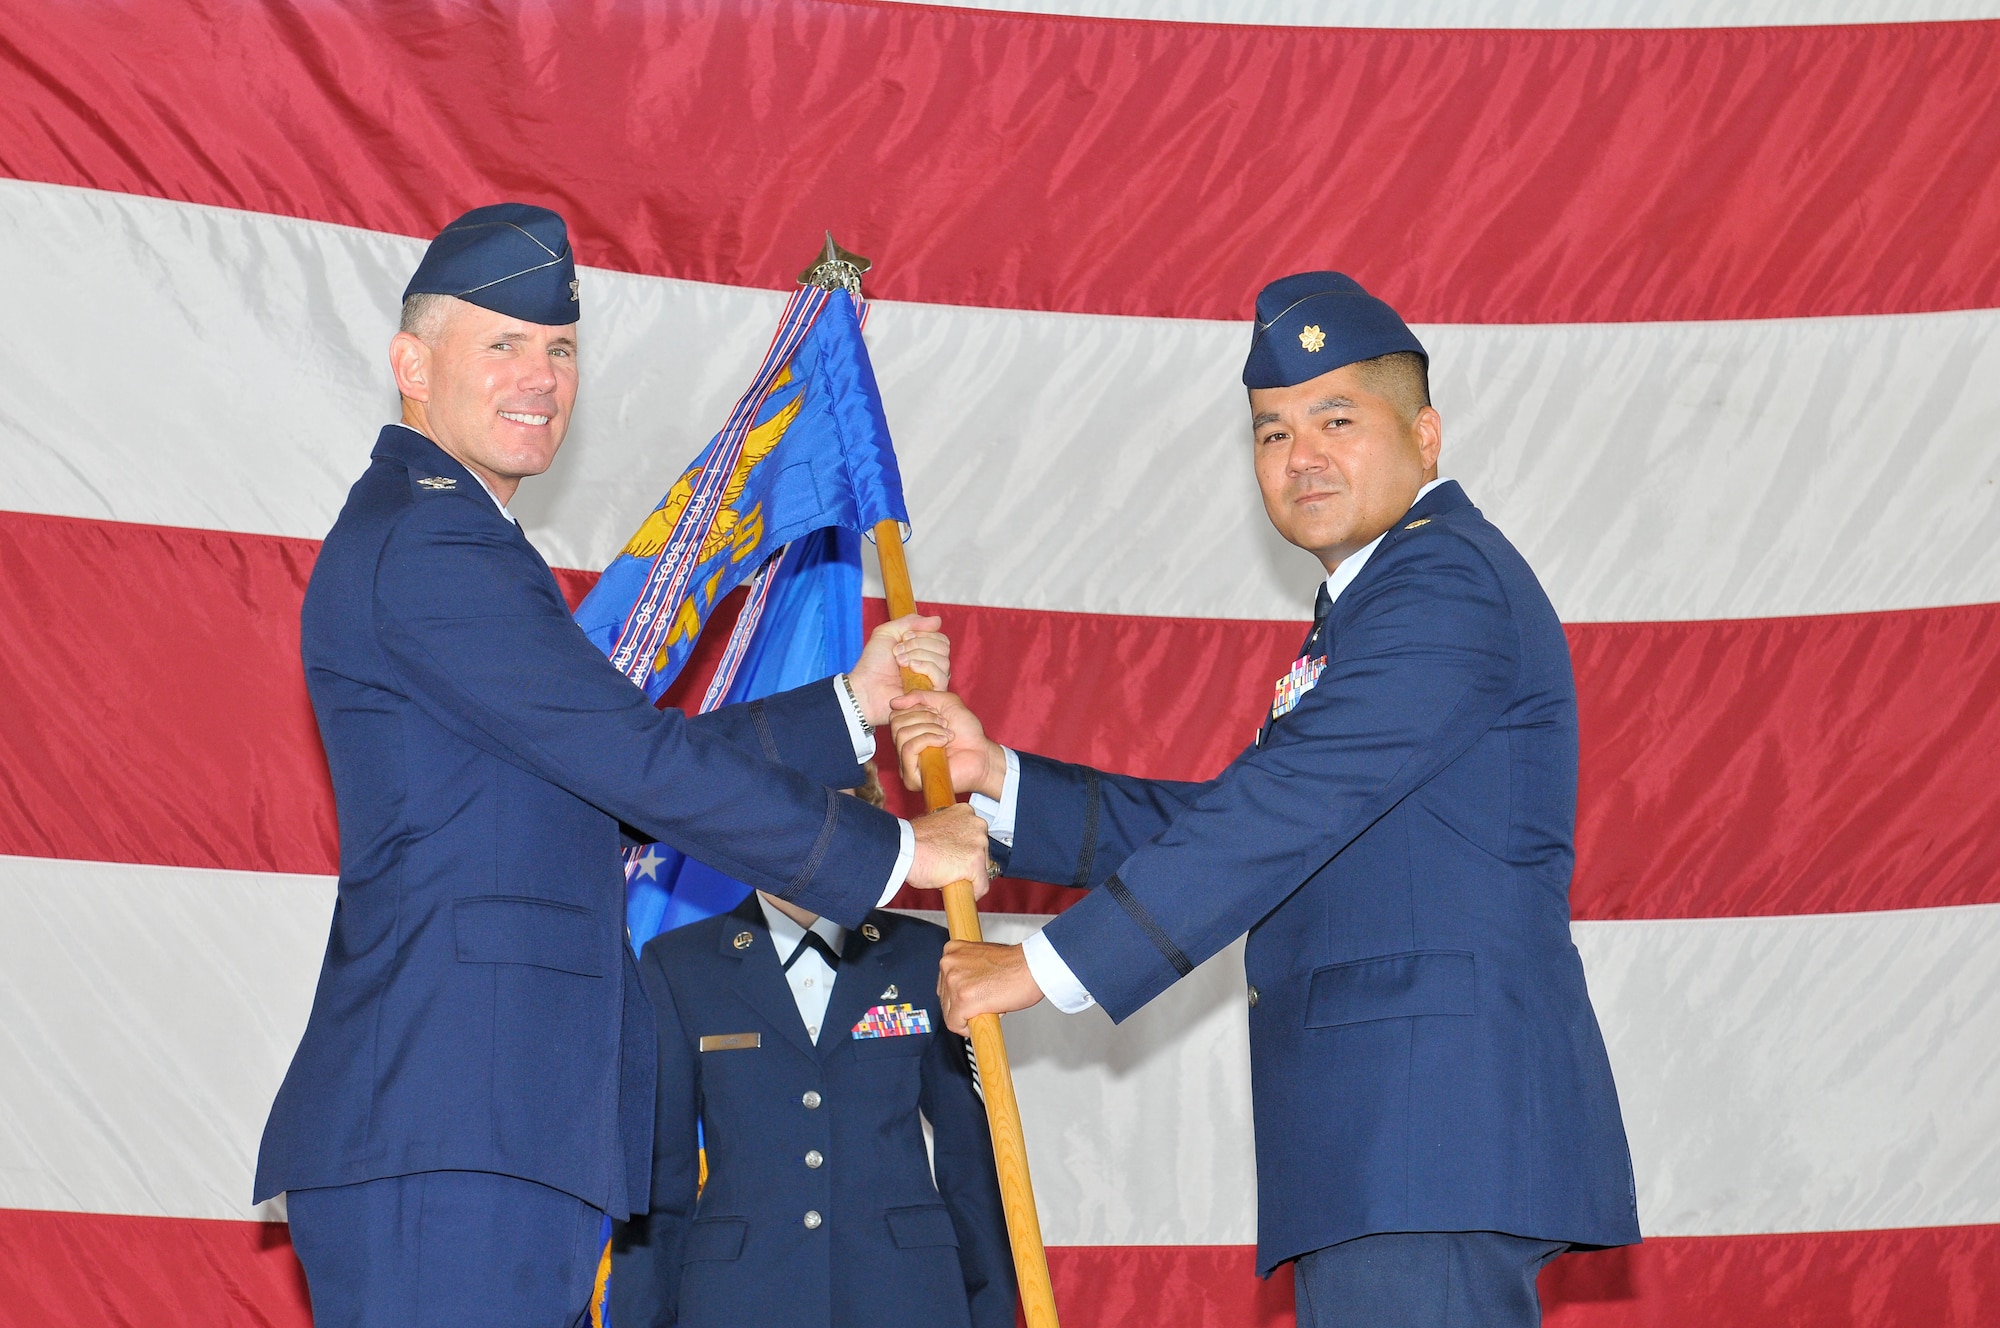 Major Christopher Cullen accepts the 325th Maintenance Operations Squadron guidon from Col. Craig Hall, 325th Maintenance Group commander, during a Change of Command ceremony June 25 at Tyndall Air Force Base.  Major Cullen replaces Maj. Richard Flamand as the new 325th MOS commander.  Major Cullen comes to Tyndall from the Secretary of the Air Force International Affairs Military Personnel Exchange Program, Washington, D.C. (U.S. Air Force photo by Lisa Norman)